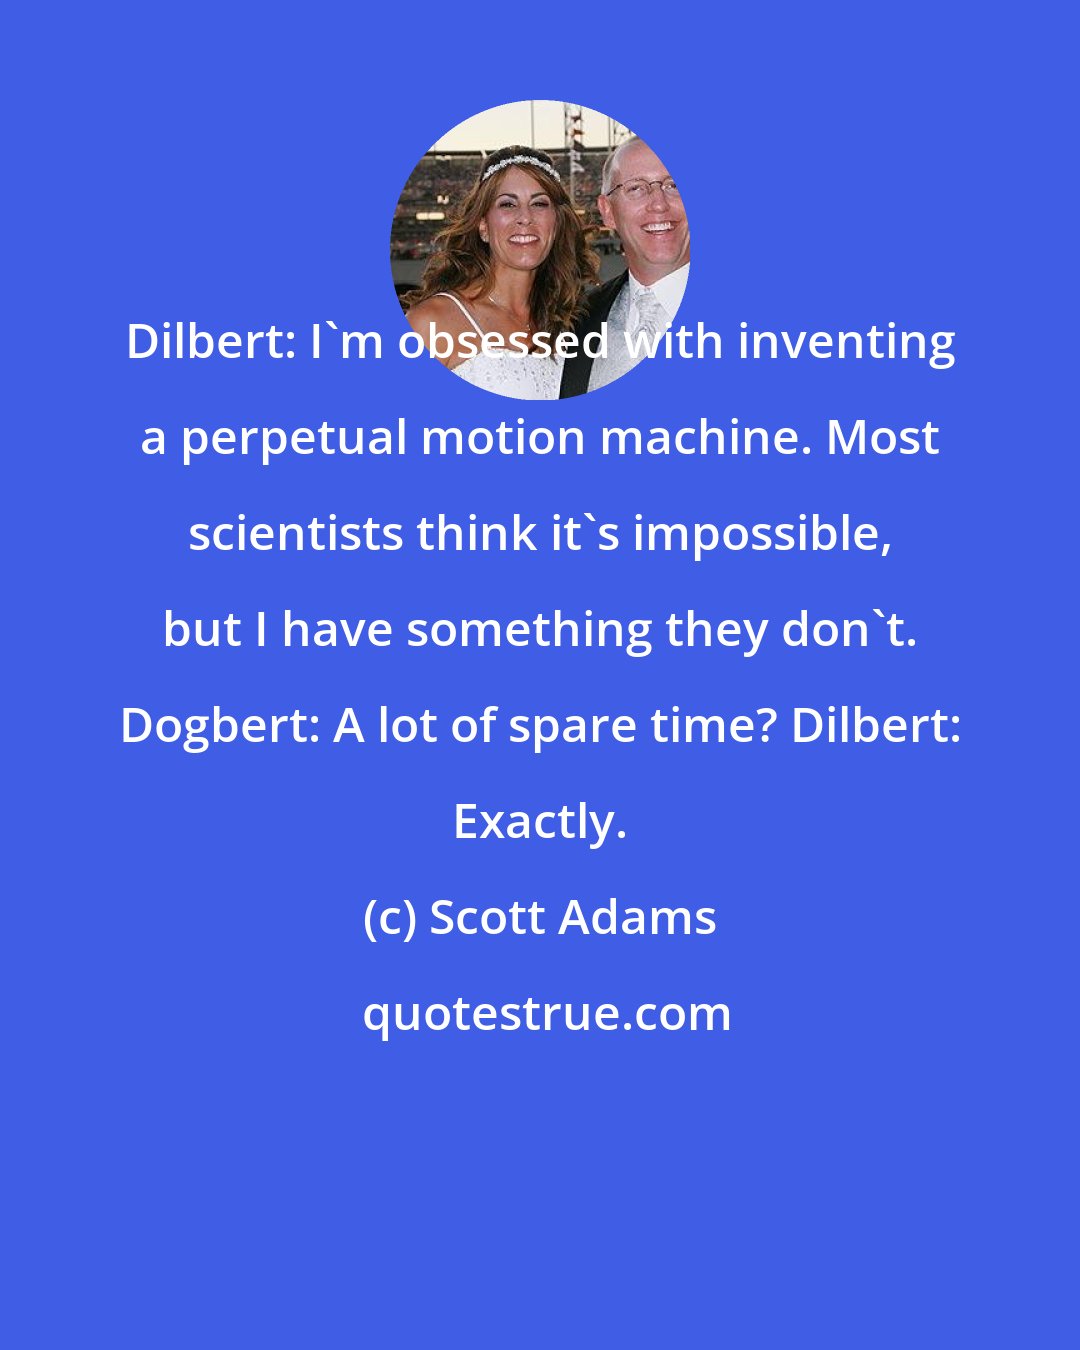 Scott Adams: Dilbert: I'm obsessed with inventing a perpetual motion machine. Most scientists think it's impossible, but I have something they don't. Dogbert: A lot of spare time? Dilbert: Exactly.